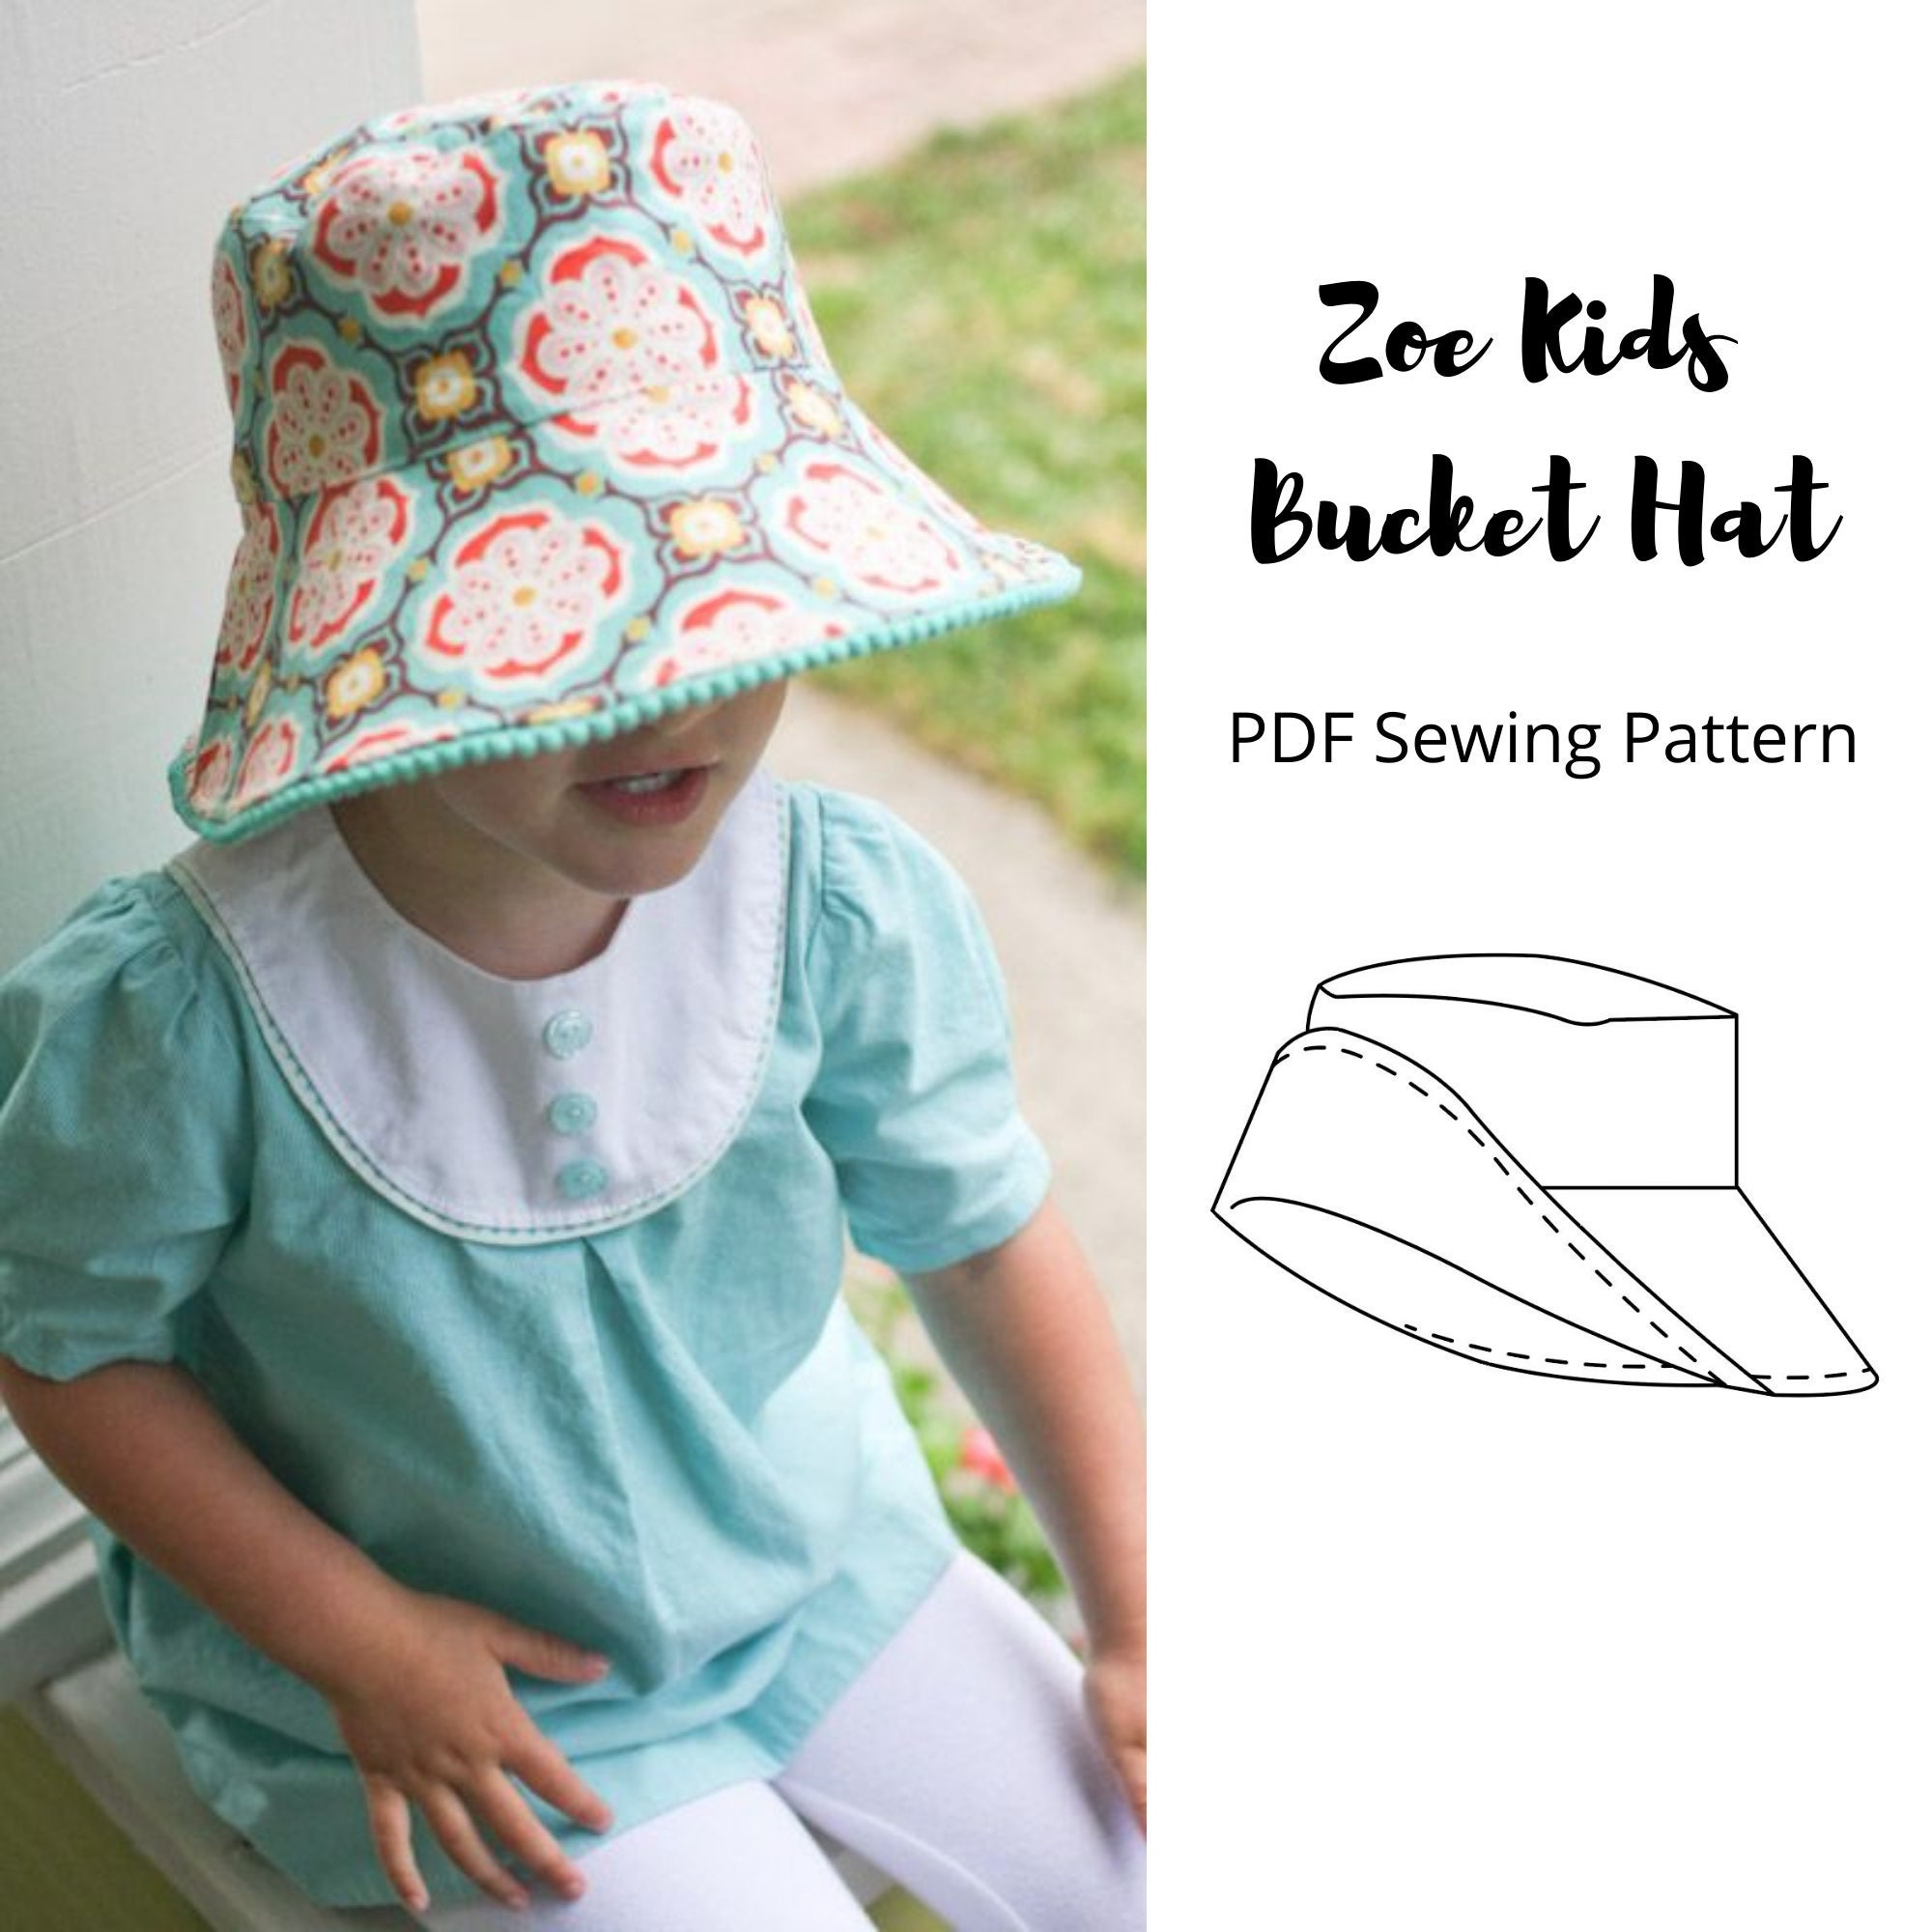 Adorable Bucket Hat for Children fits Head 20 Digital PDF Sewing